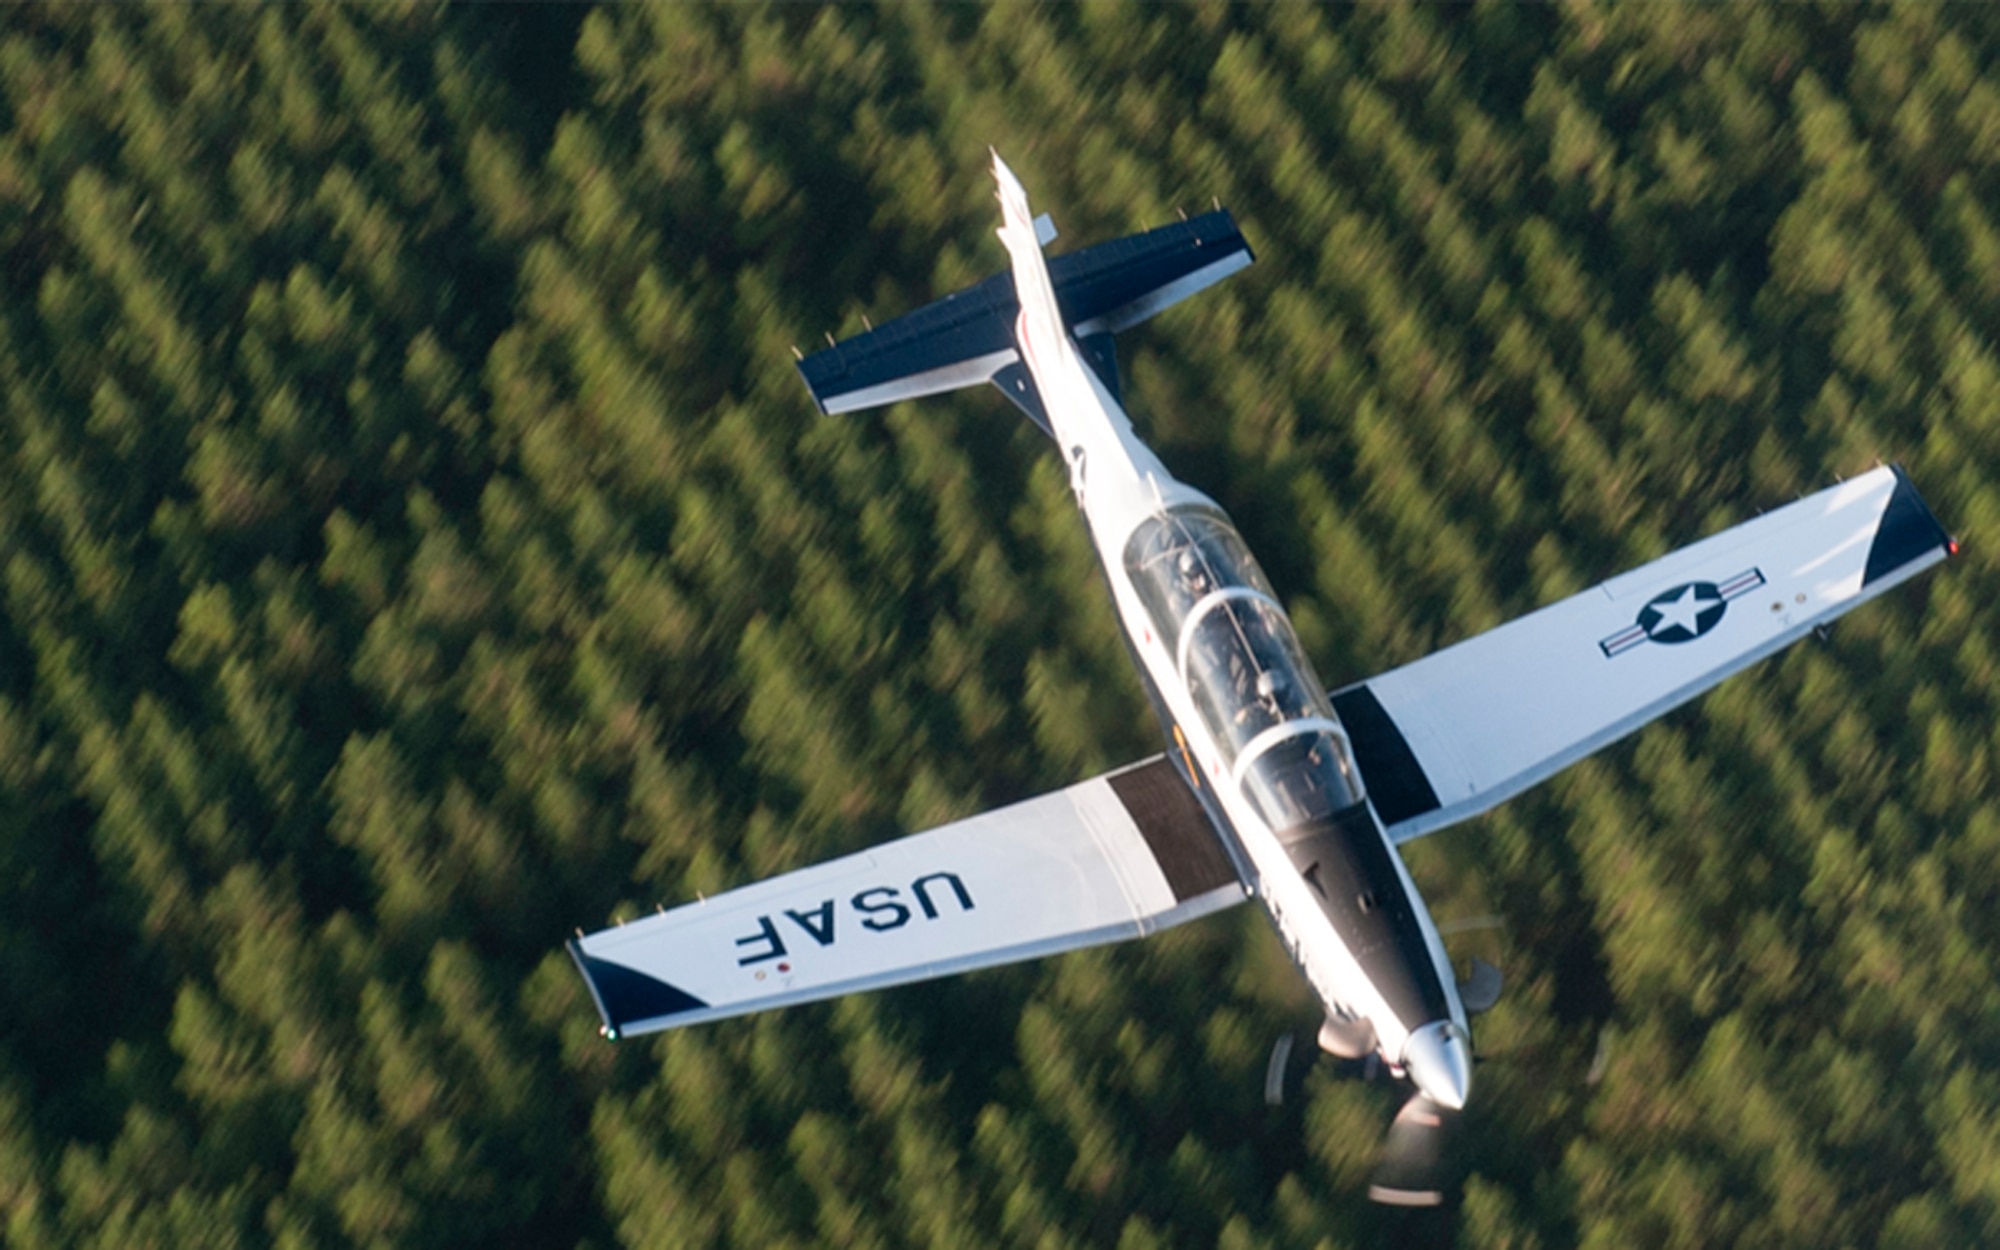 “THREE-LEGGED RACE”: When the flight controls malfunctioned on their T-6 Texan II, an instructor pilot and his student had to figure out a way to land the plane safely back home at Sheppard AFB, Texas. The pilot had only been an instructor for a little over a month, while the student pilot had never even flown solo. (Photo by TSgt Samuel Bendet)